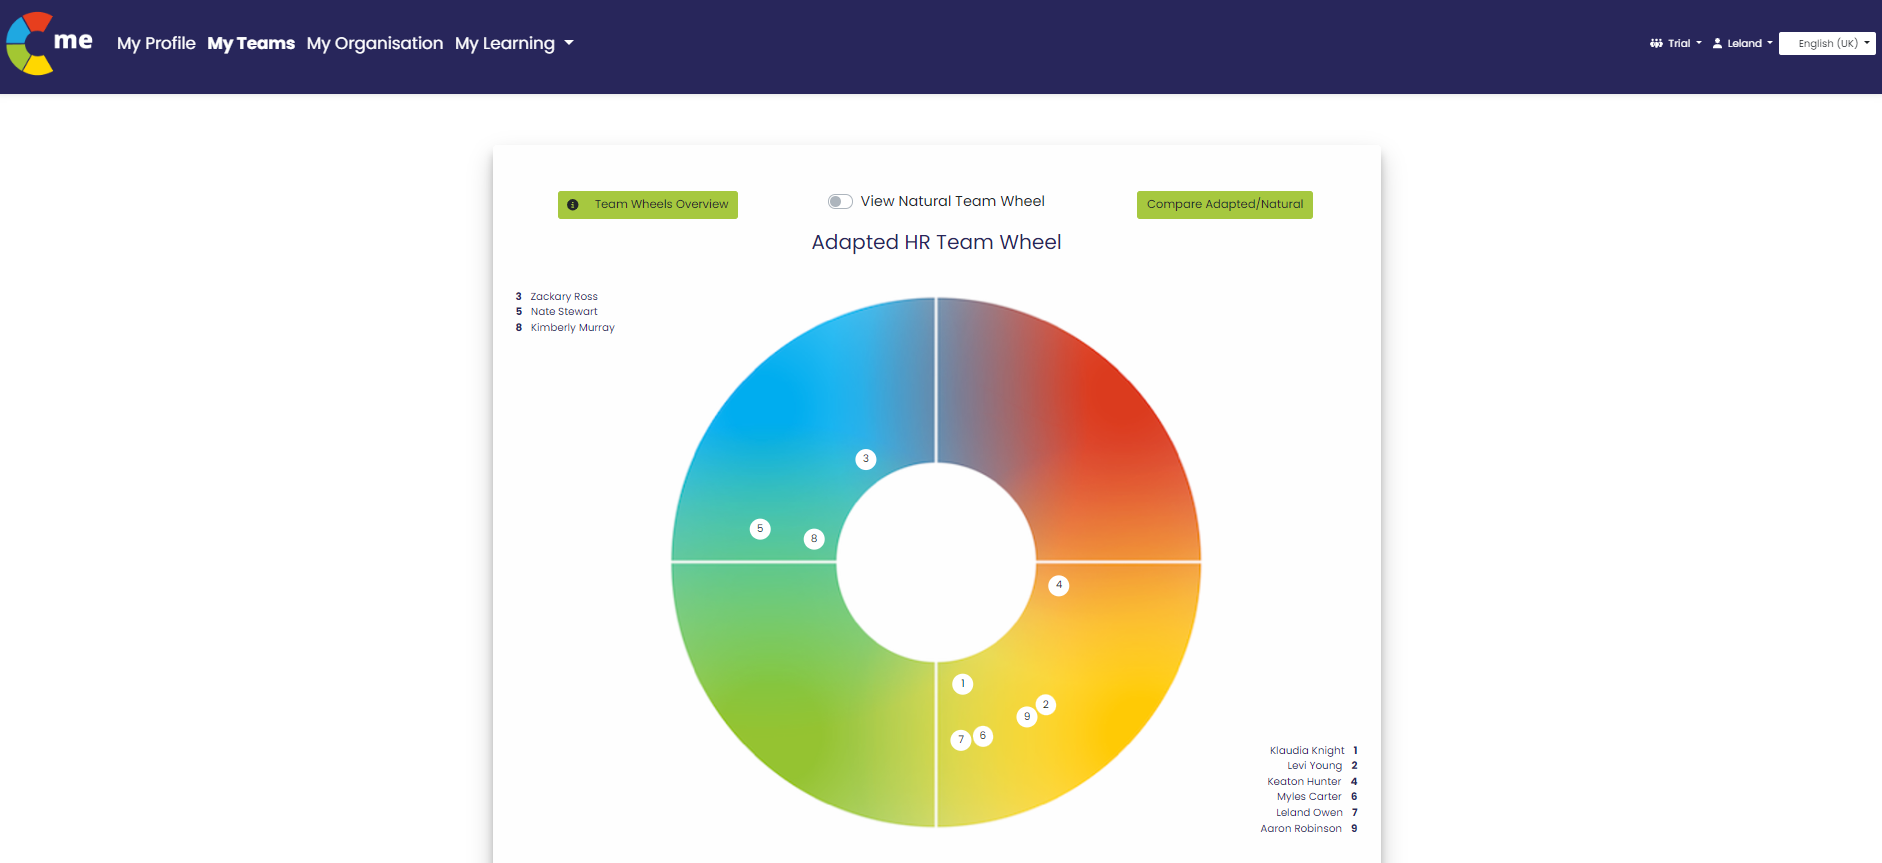 This is a C-me team wheel. This plots employees within teams onto a colour wheel so you can understand team dynamics. From here, you can click into individual colleagues to understand their preferences better.